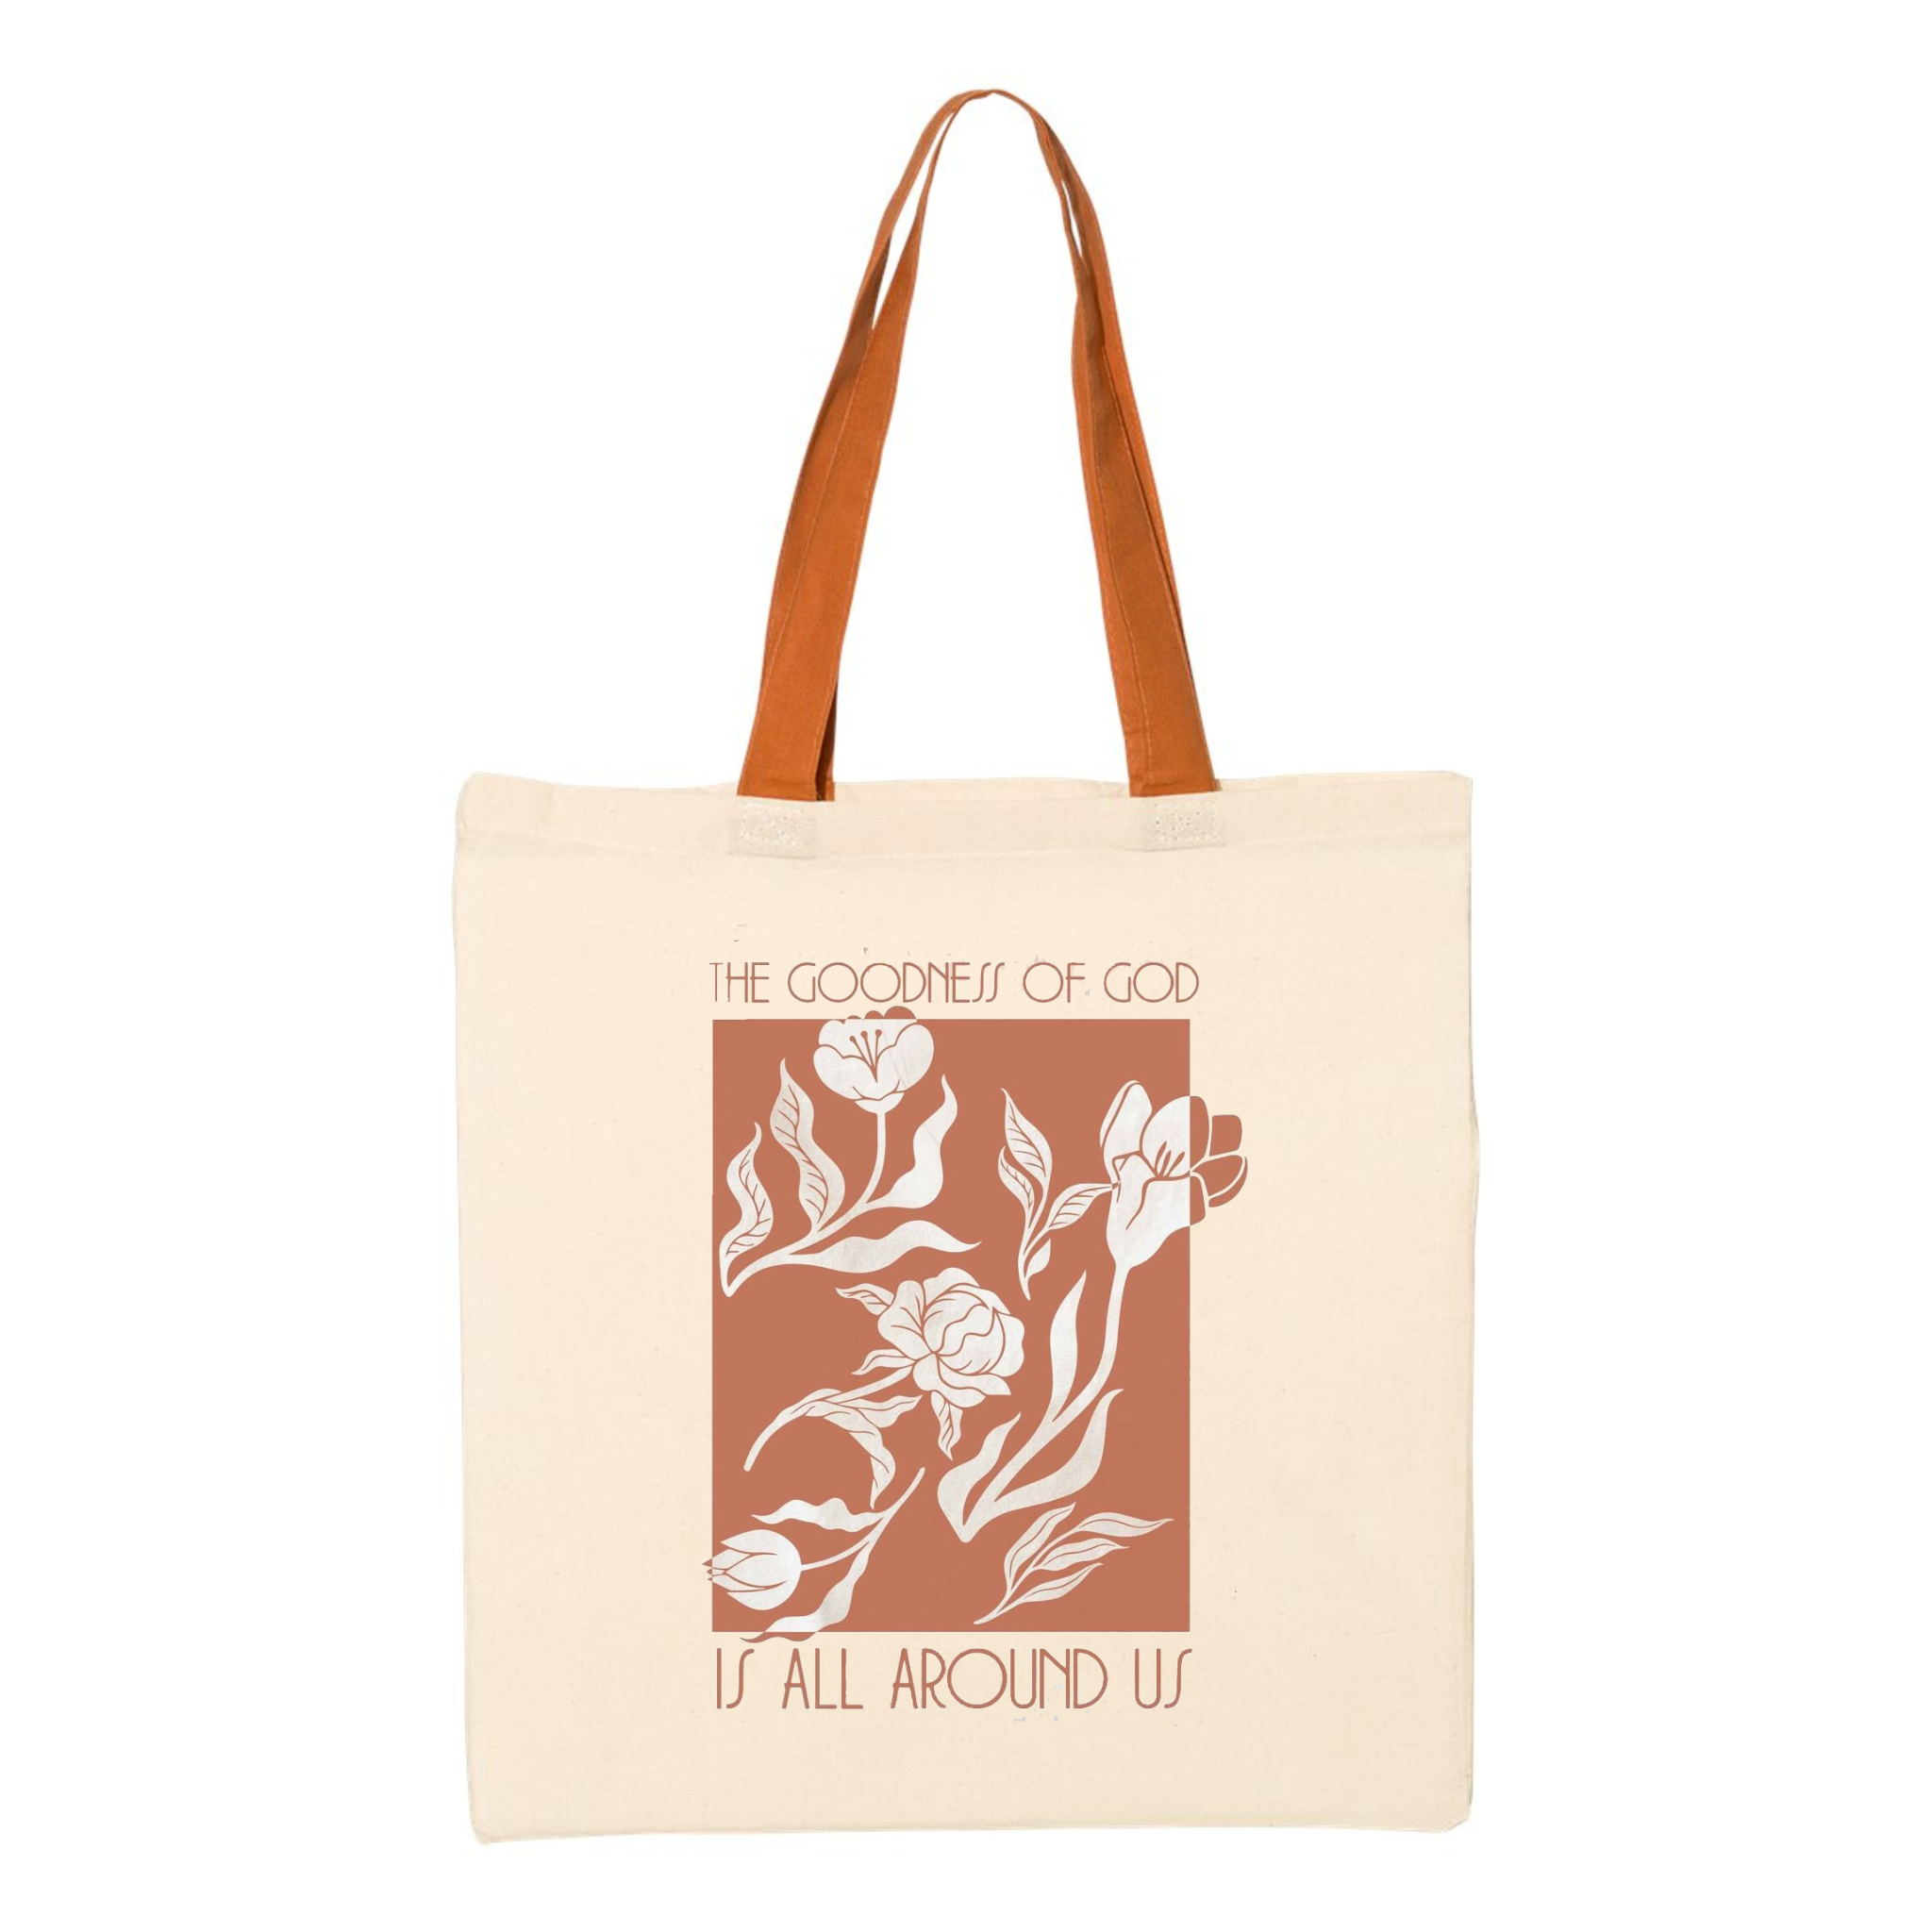 The Goodness of God Is All Around Us Tote Bag